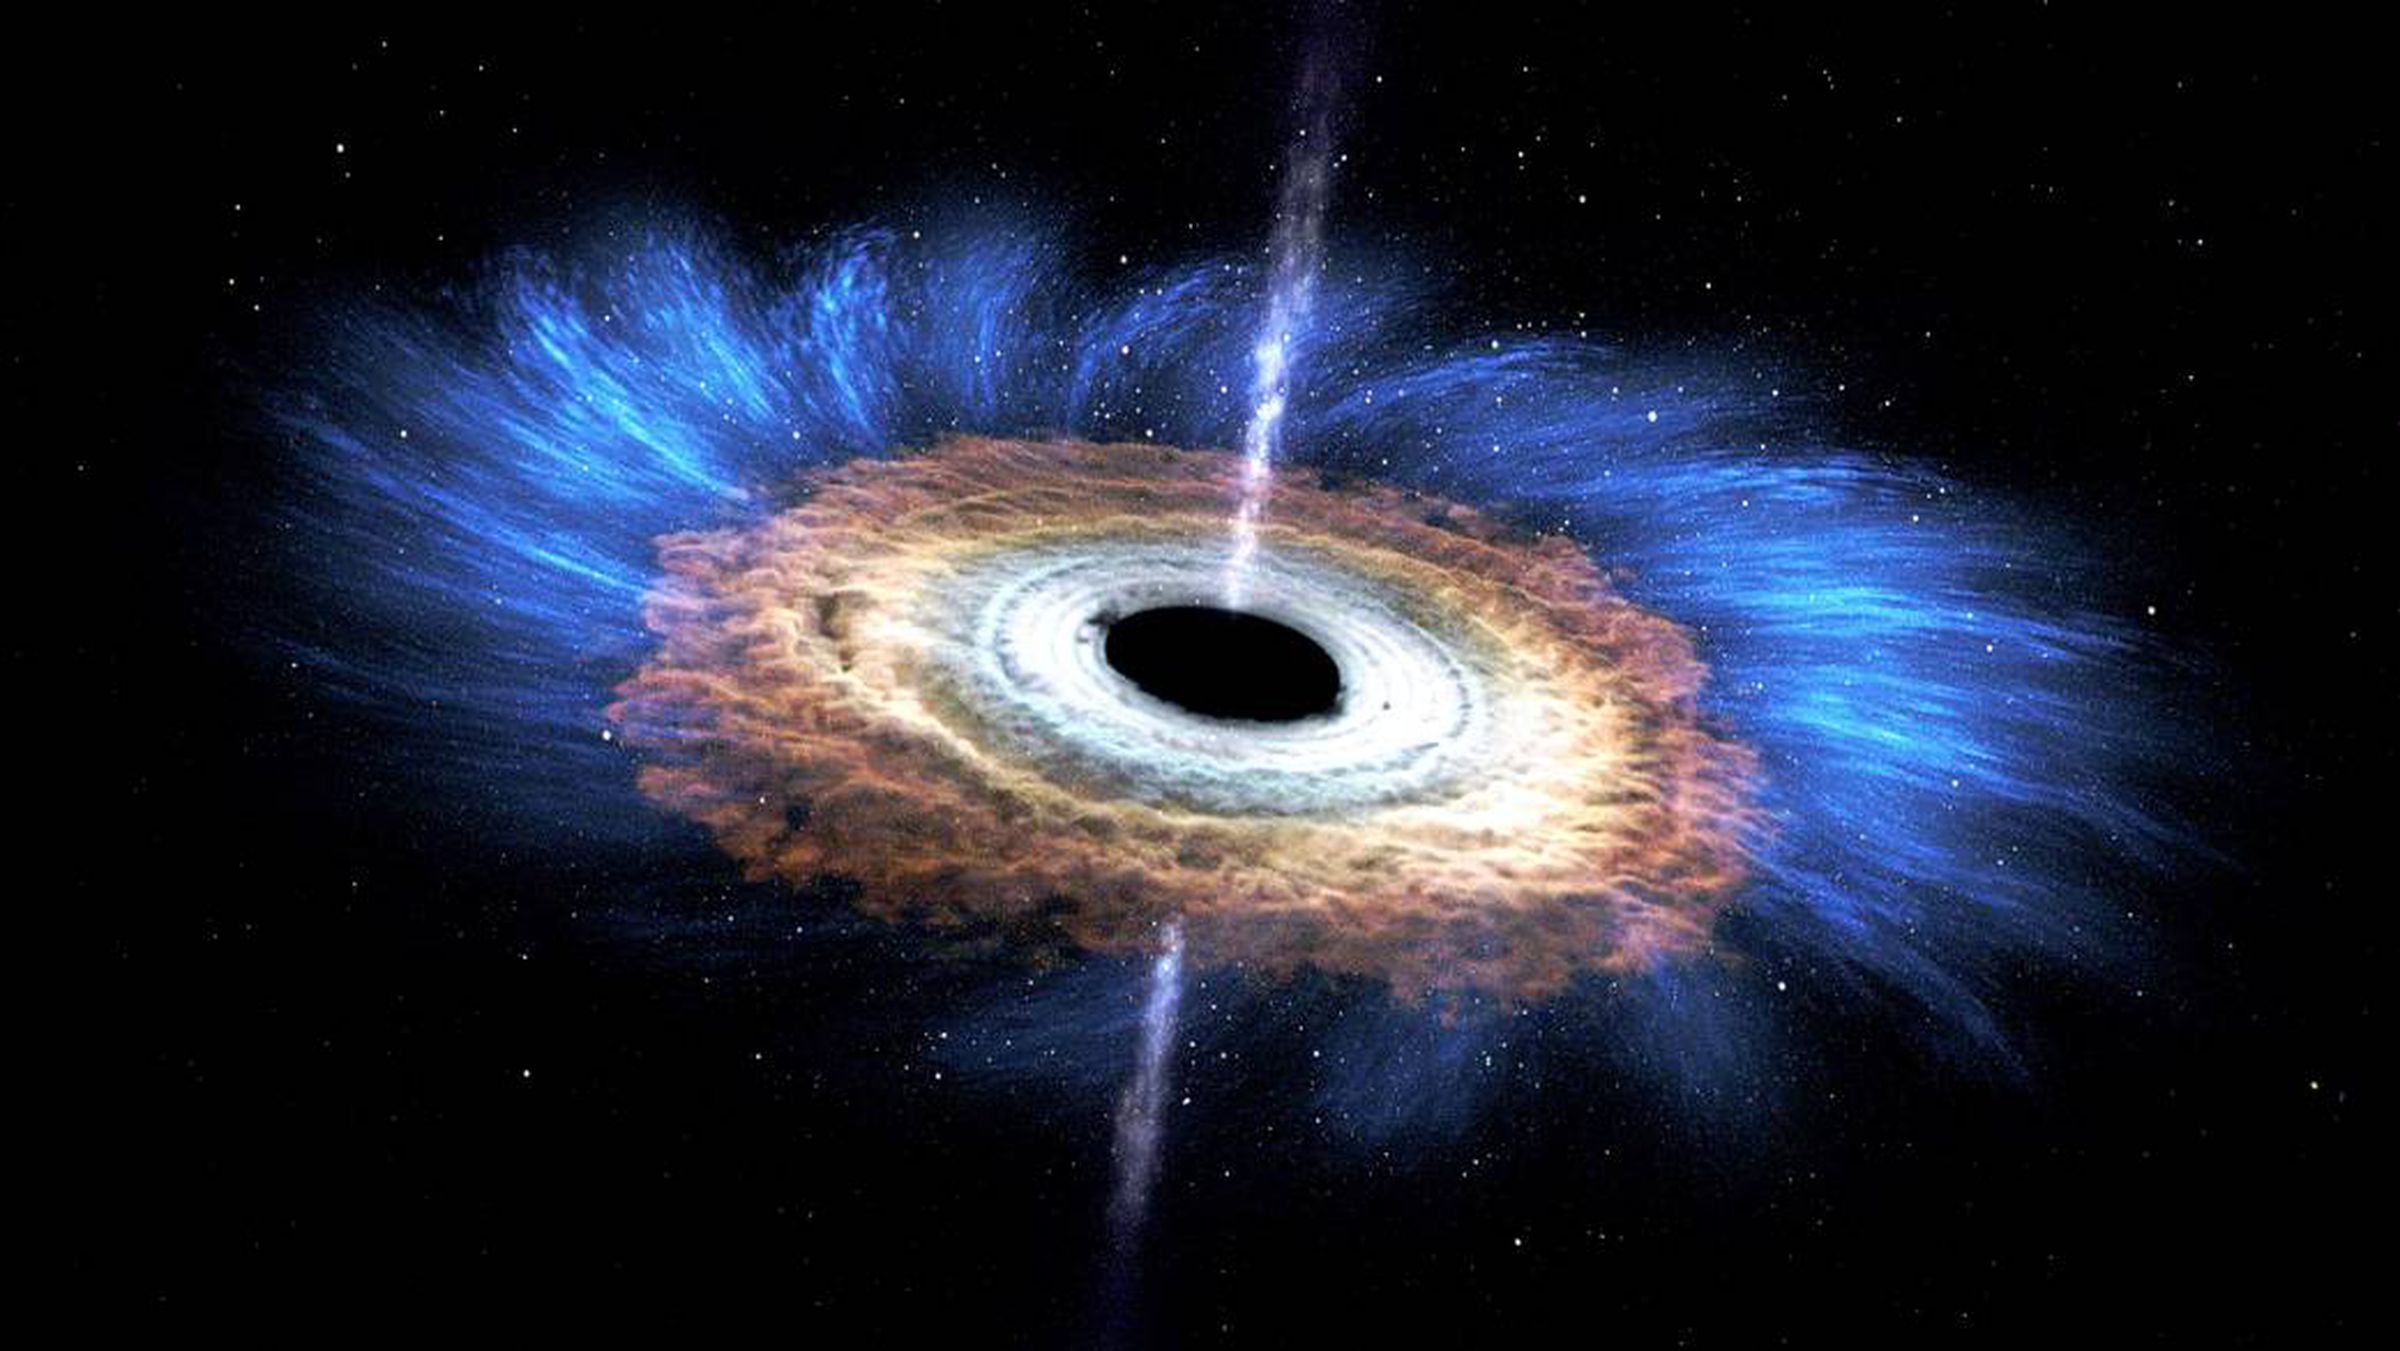 A different interpretation of a star being torn apart by a black hole.